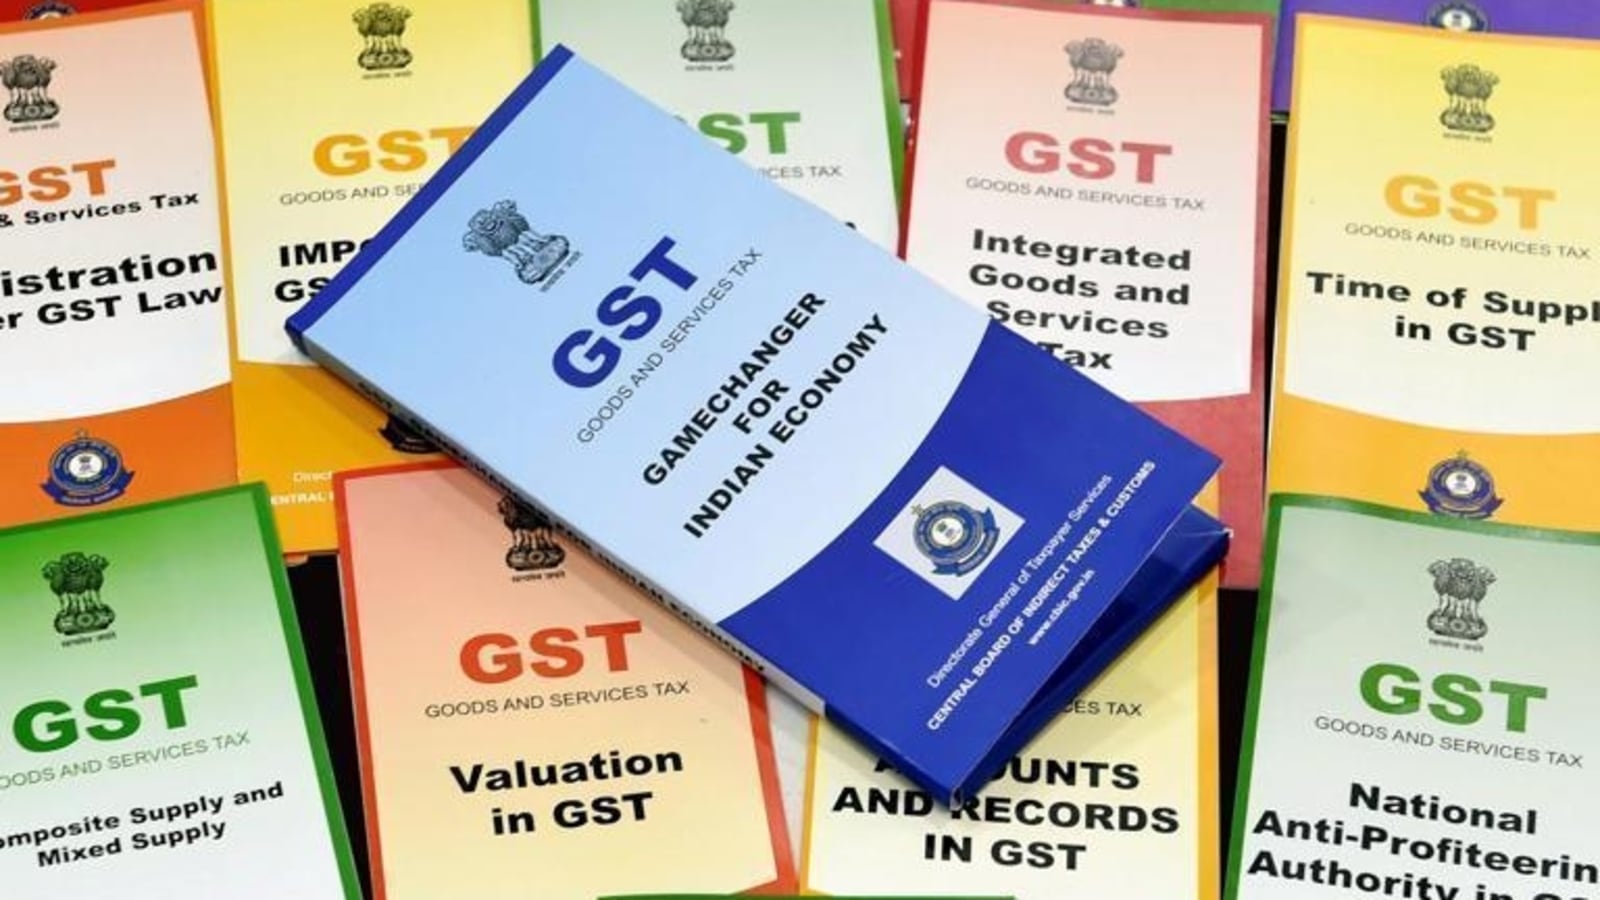 gst-registration-exemption-for-sellers-with-low-turnover-to-boost-e